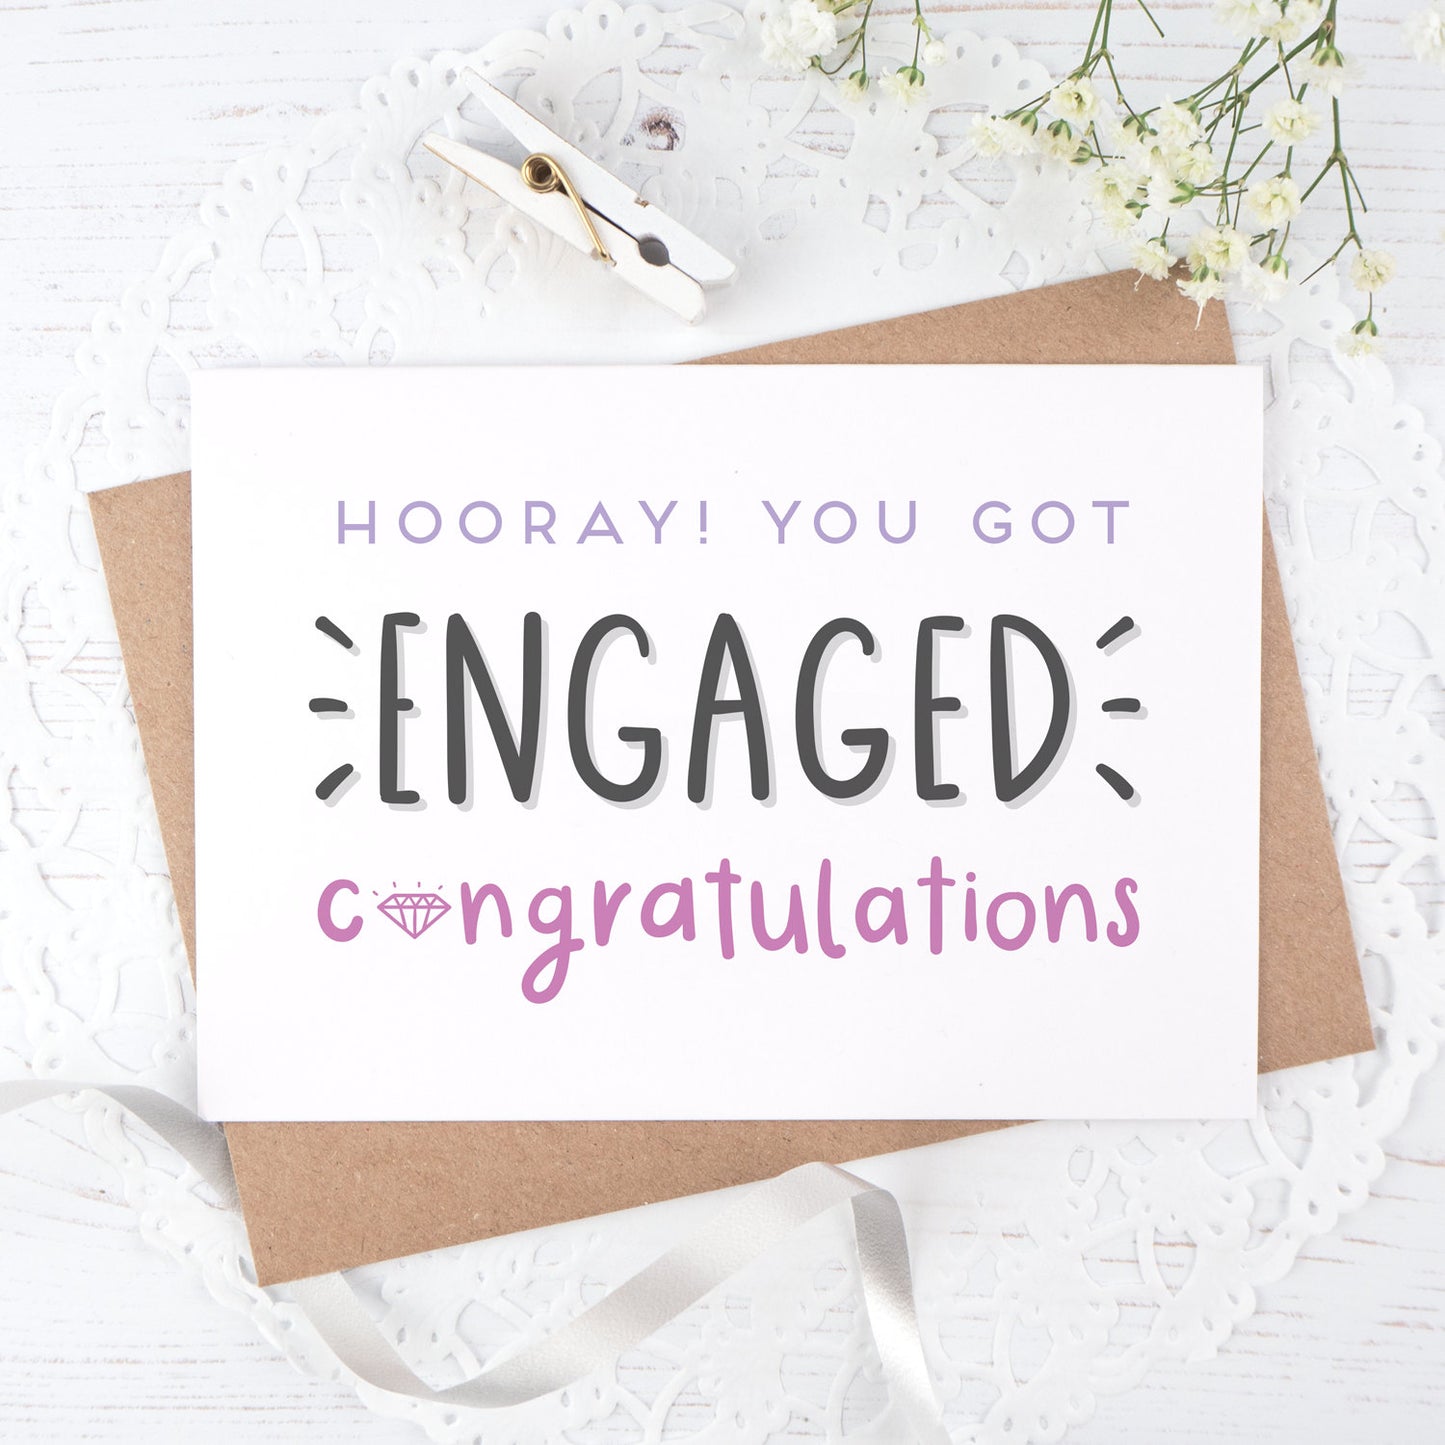 Engagement congratulations card in purple